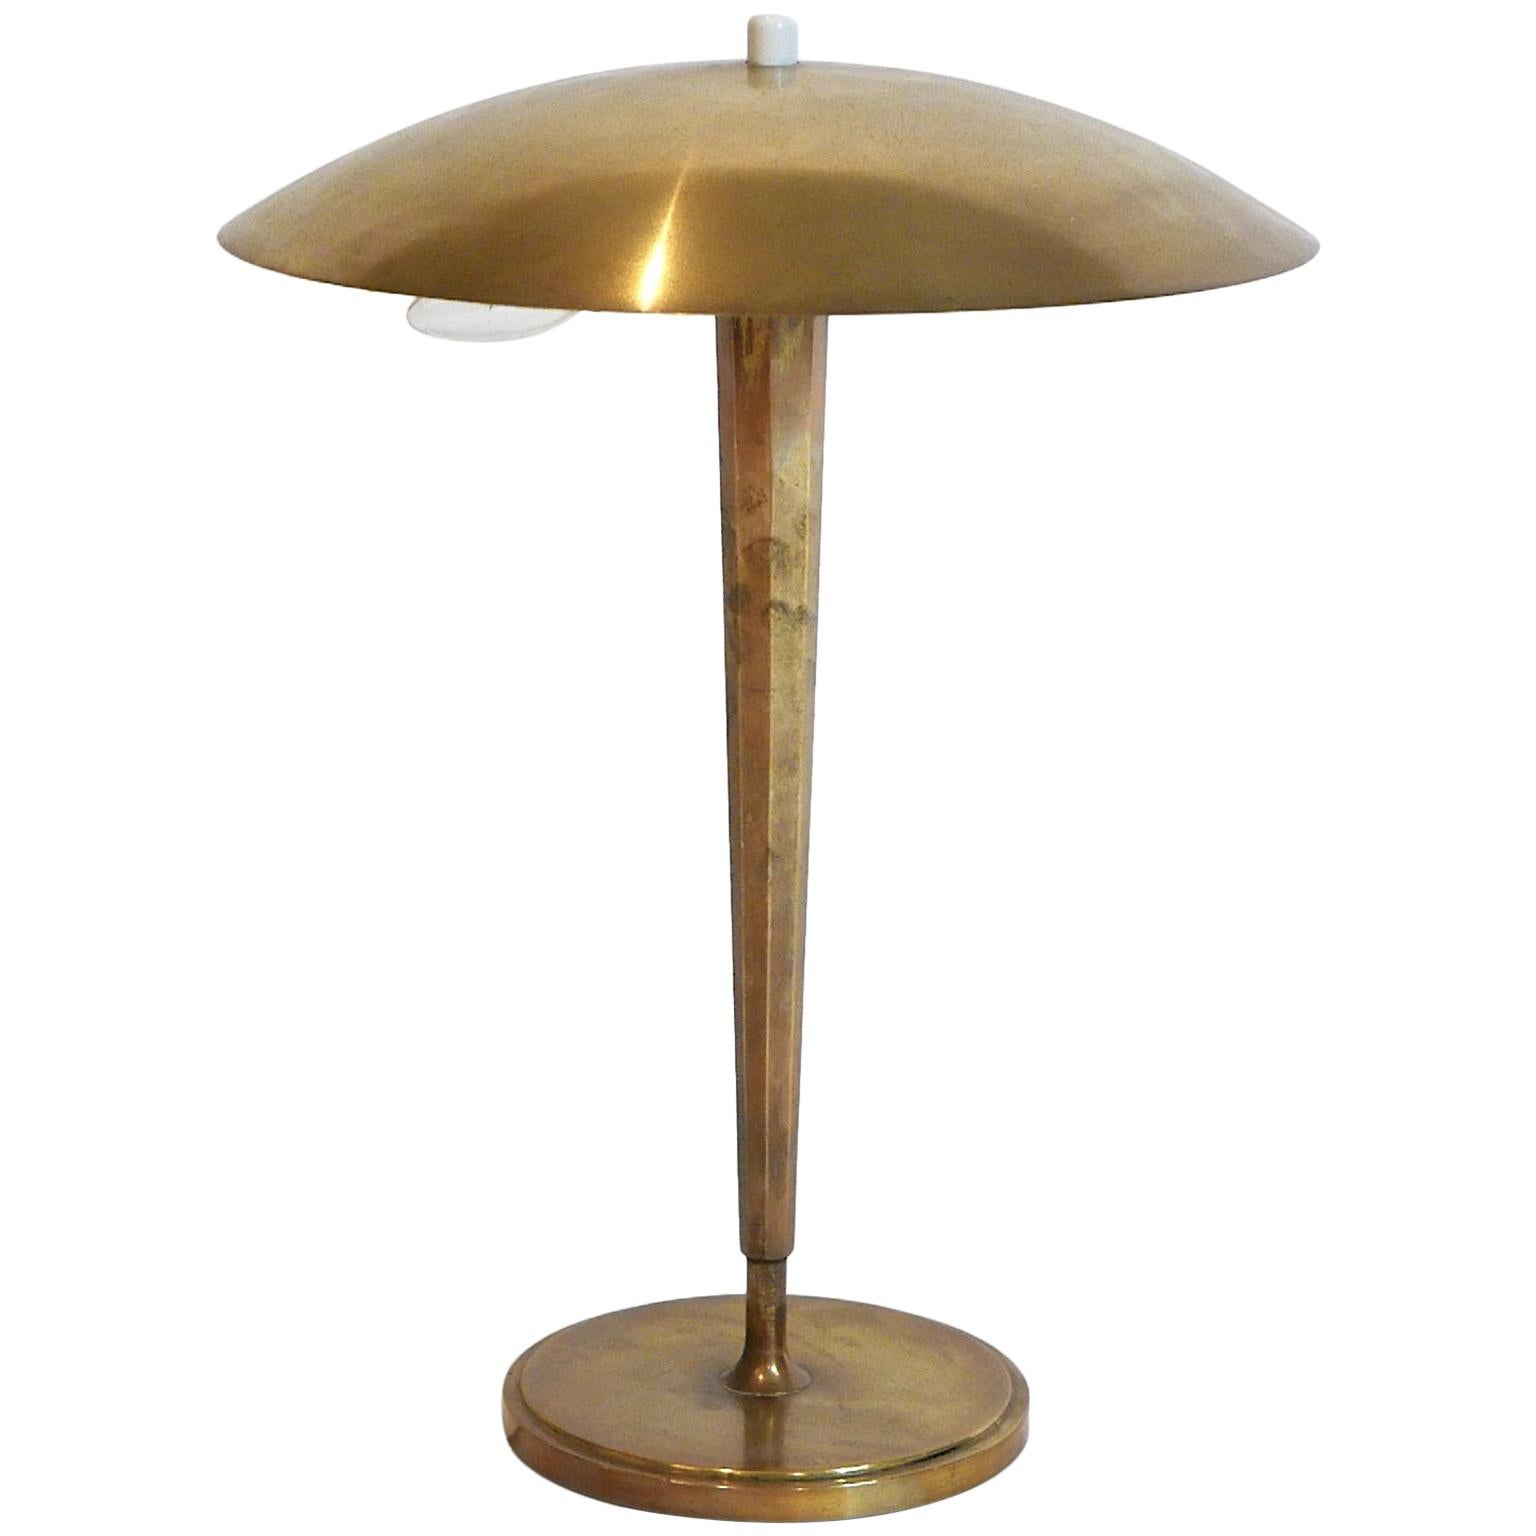 Suburb Quality Scandinavian Brass Table/Desk lamp by Bohlmark after Paavo Tynell